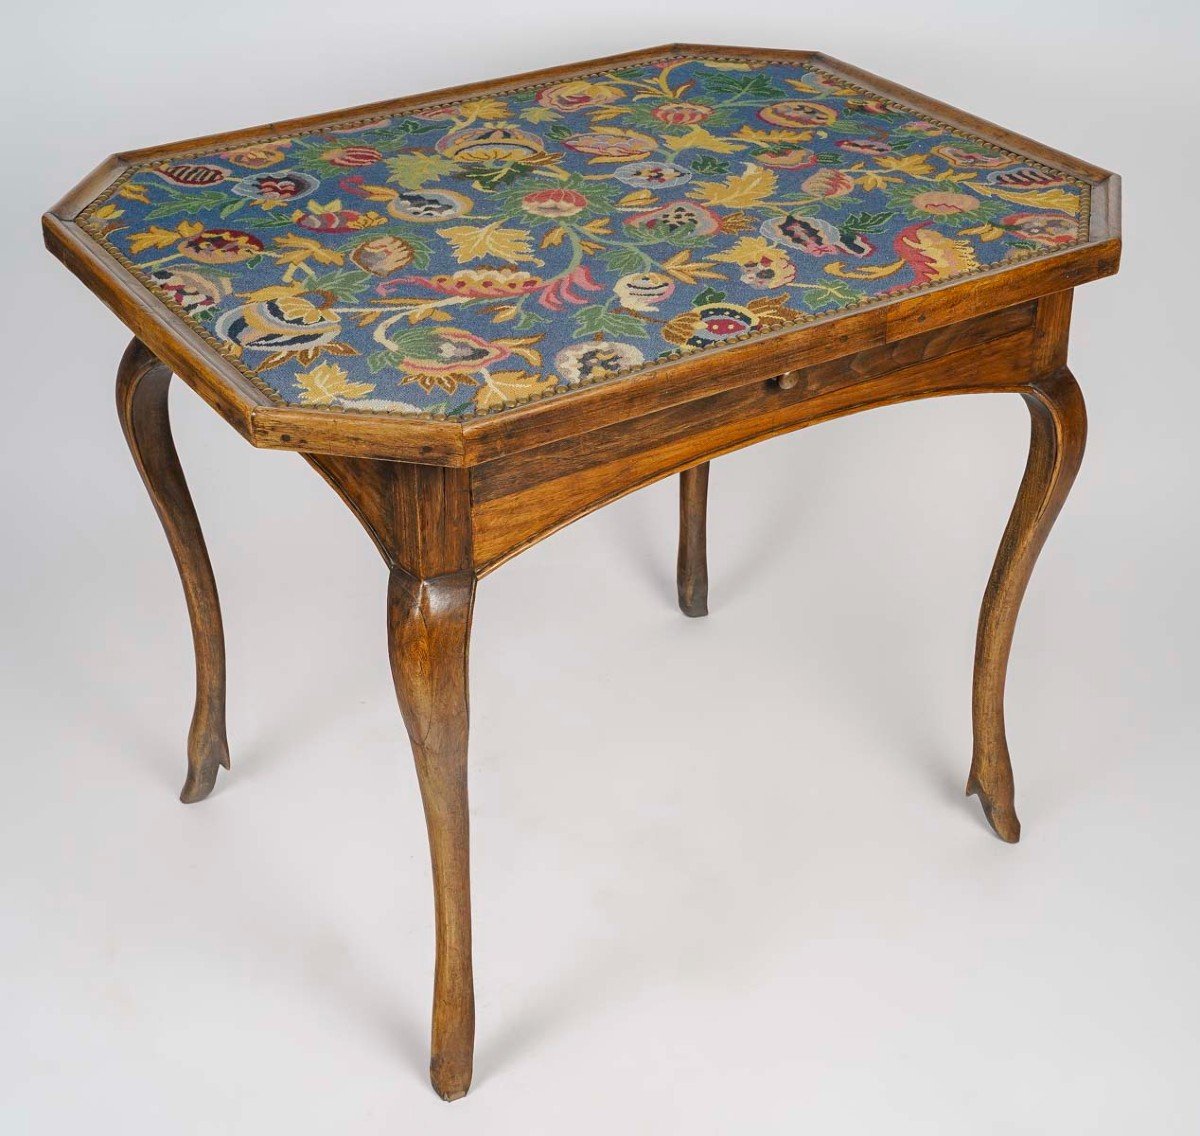 Louis XV Style Games Table. Late 18th Century.